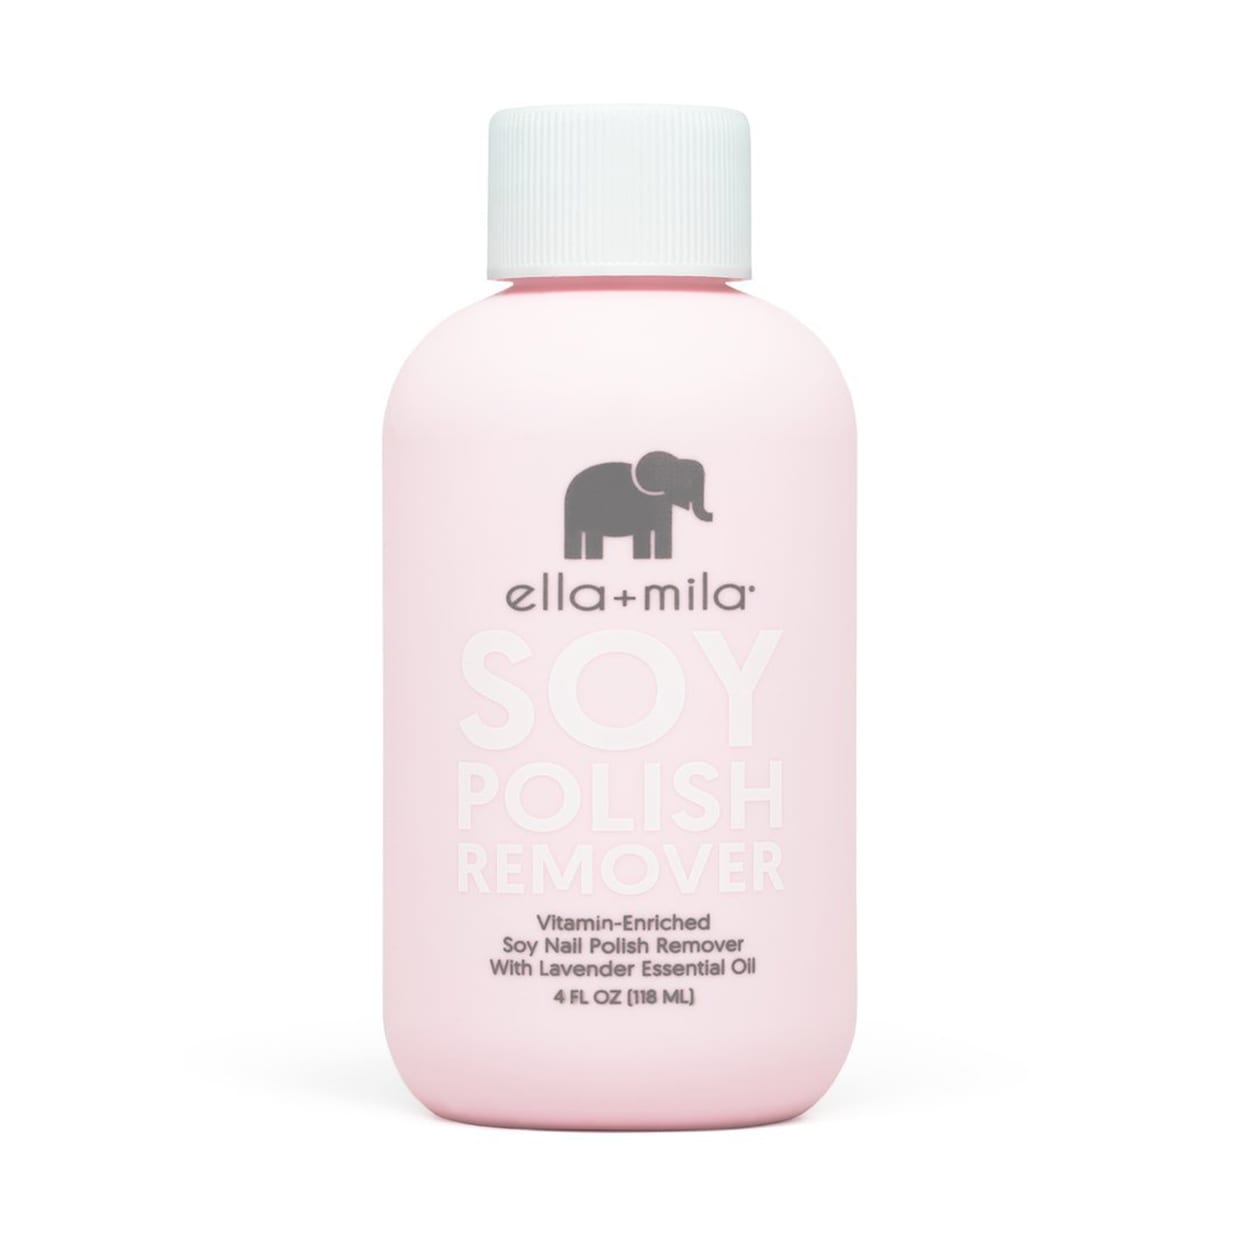 A pink bottle with a white cap of soy nail polish remover form Ella + Mila.